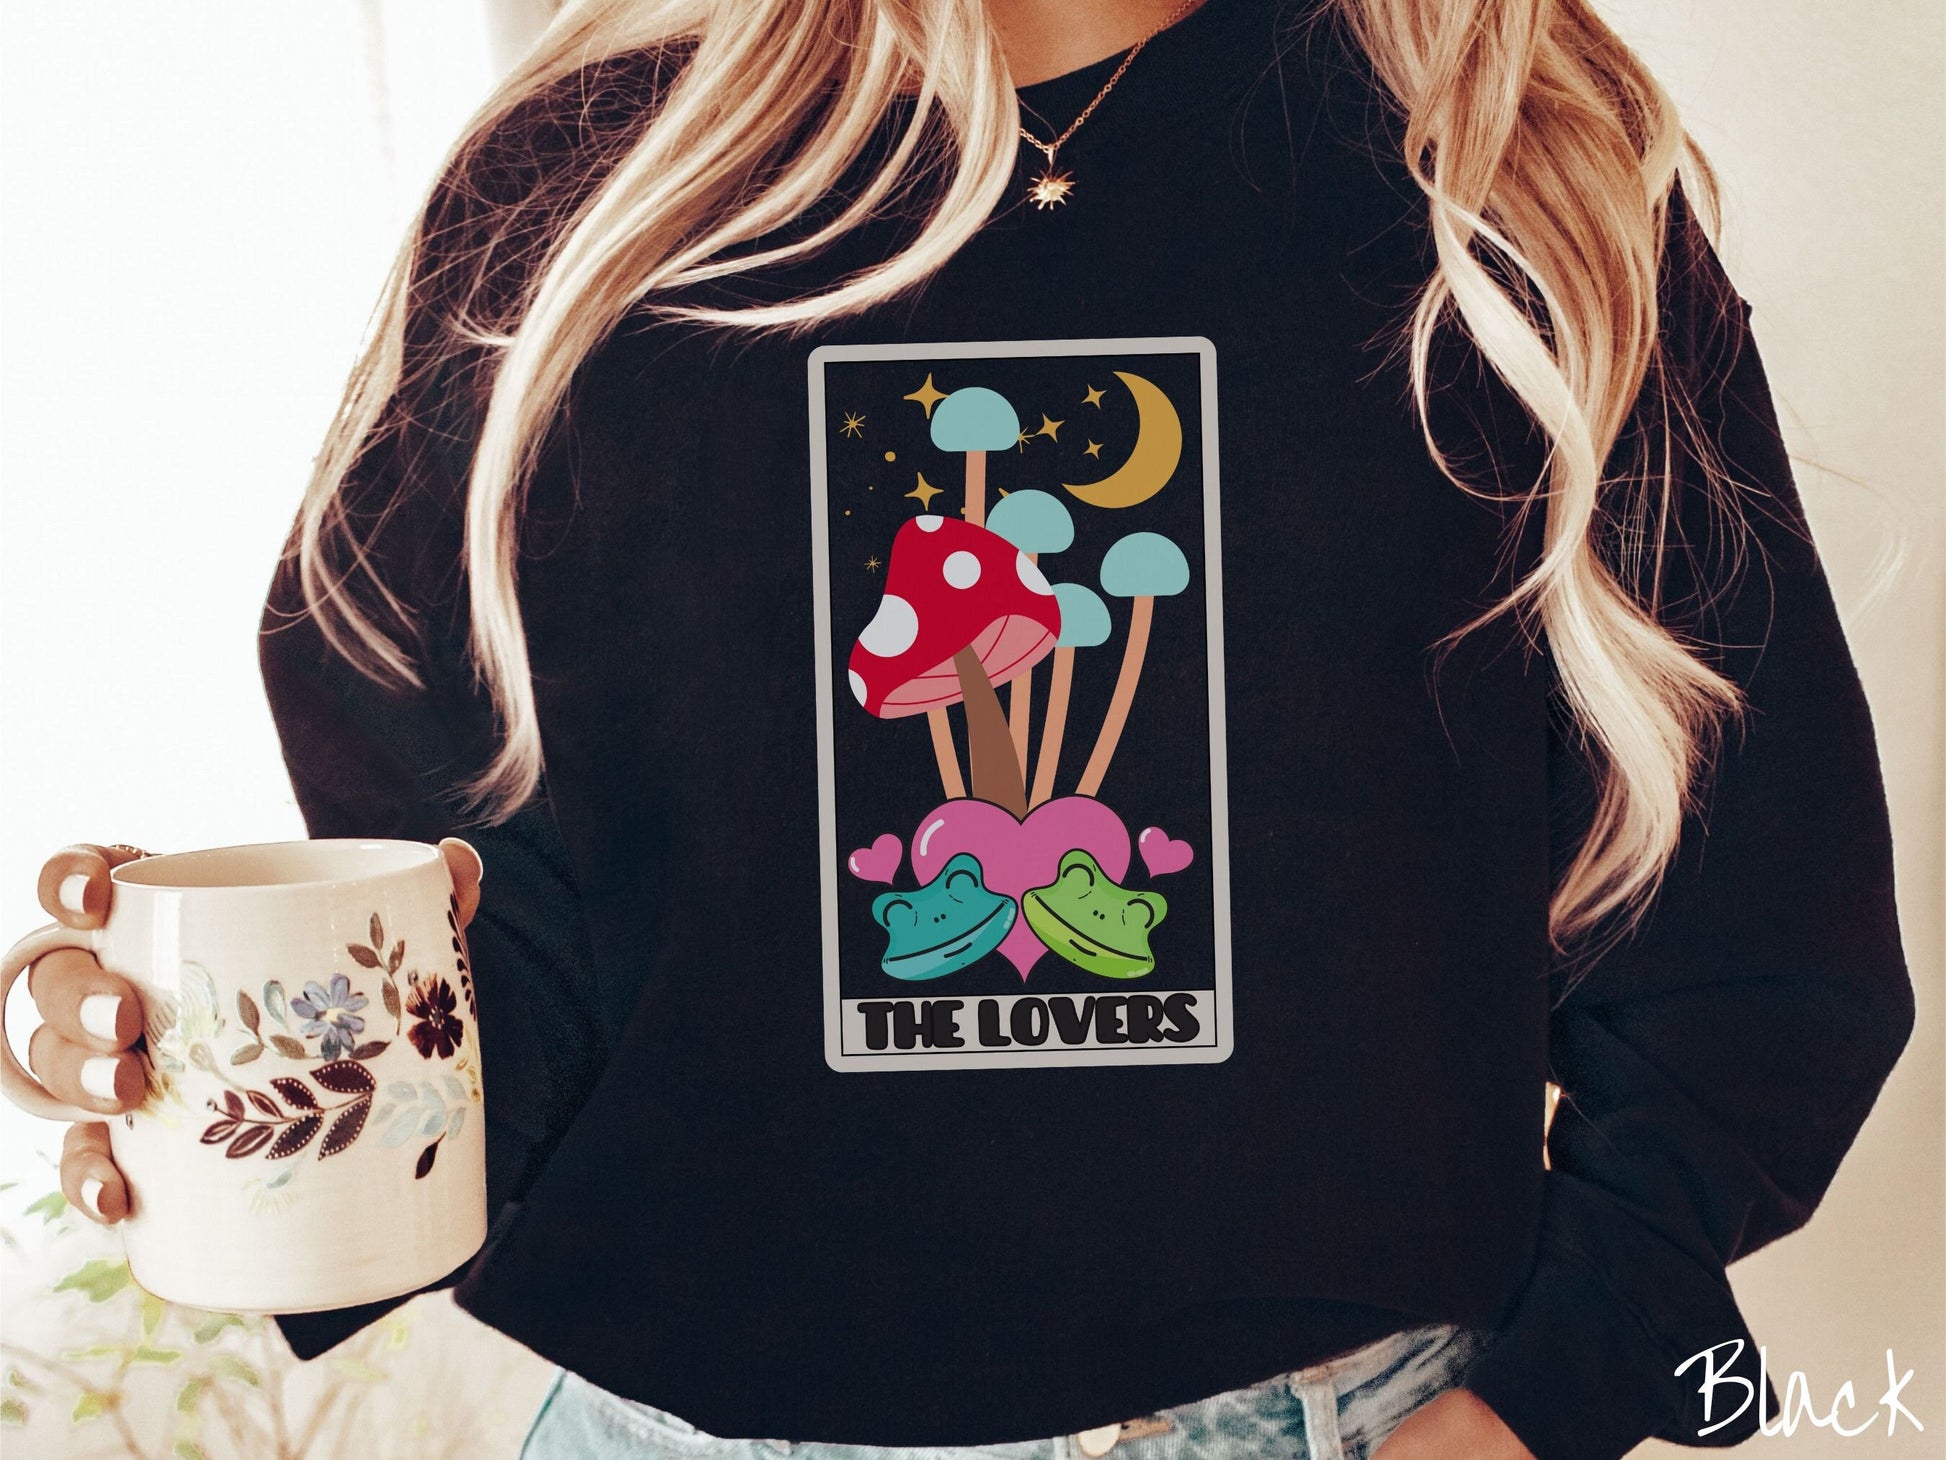 A woman wearing a cute black colored sweatshirt with a large red mushroom and 4 turquoise mushrooms in the background, all under a crescent yellow moon and yellow stars, two green frogs smiling in front of pink hearts below the mushrooms.